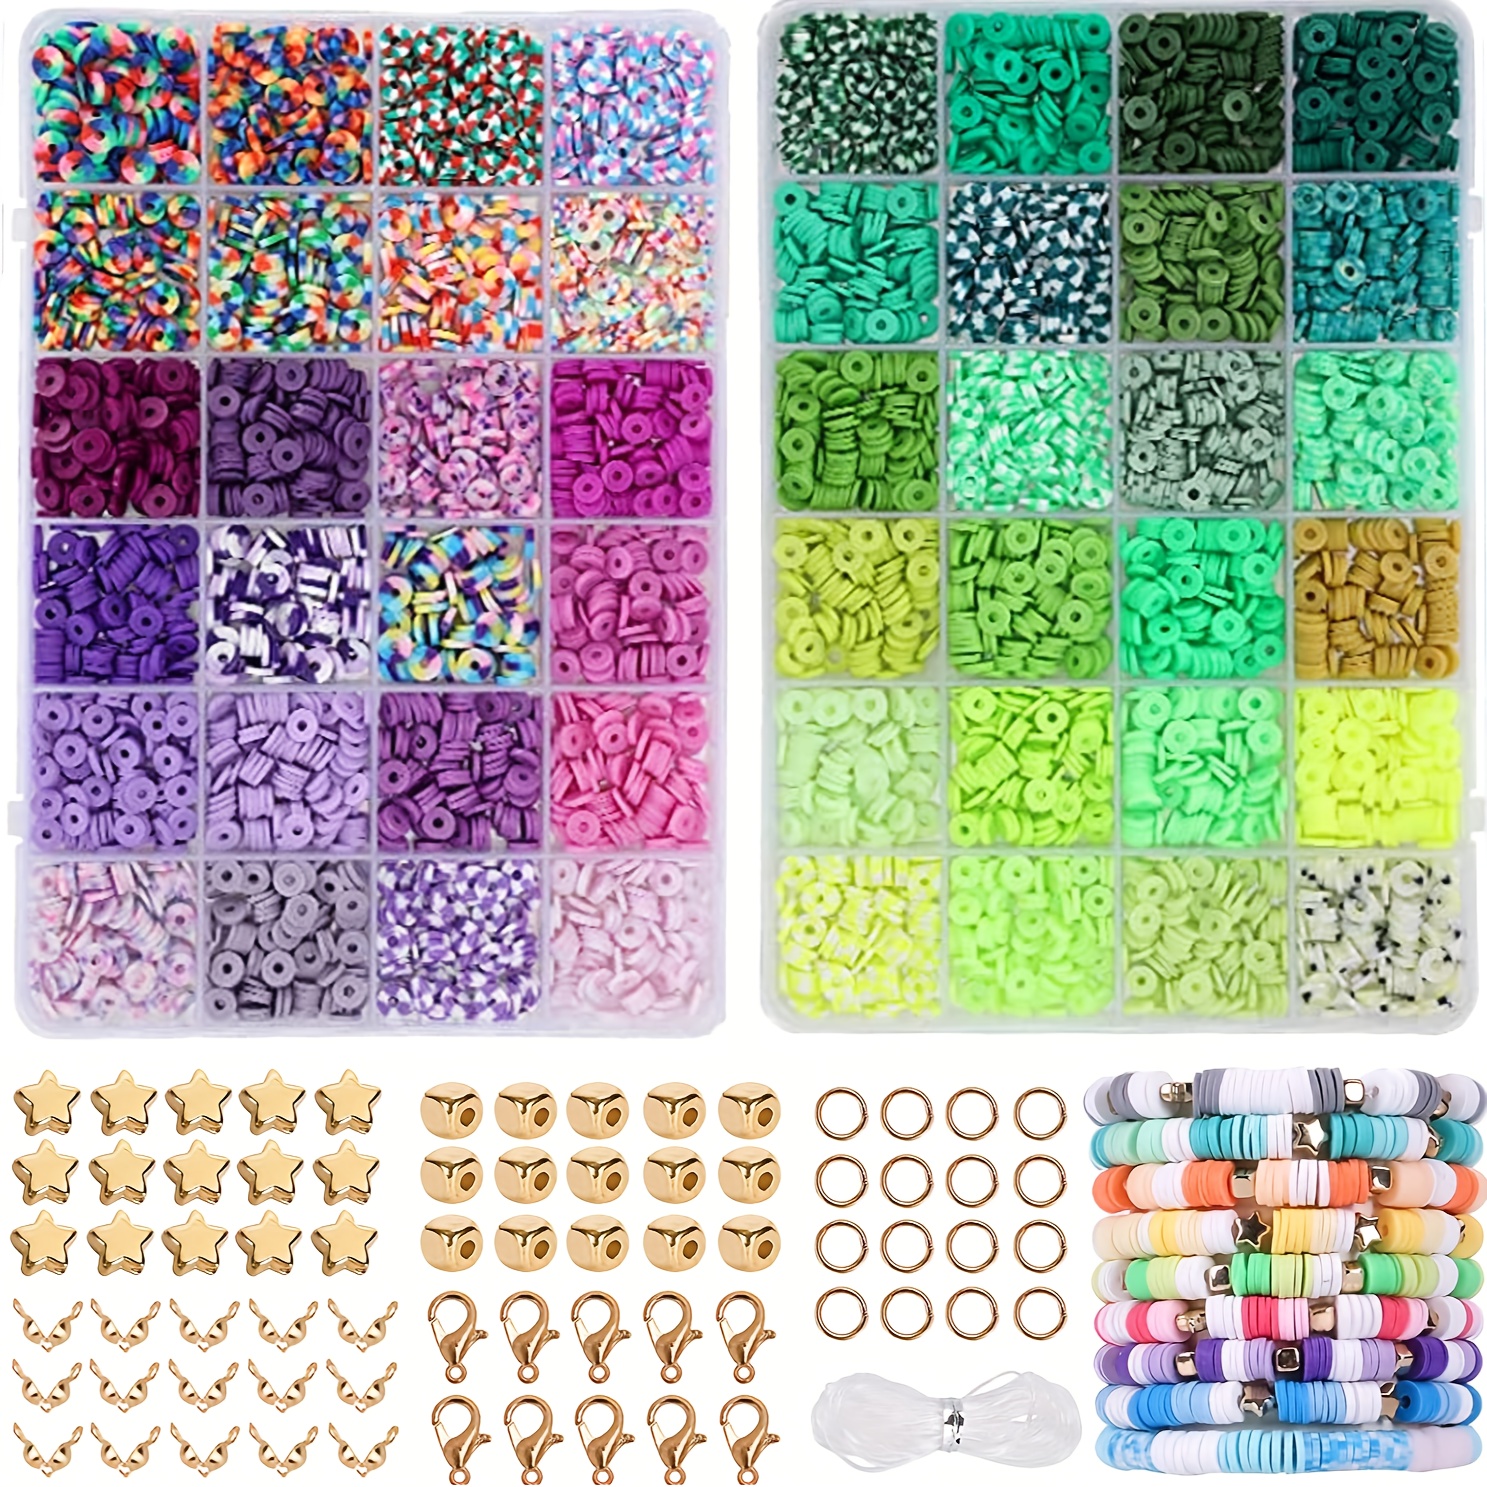 4800pcs Flat Round Polymer Clay Spacer Beads For Jewelry Making